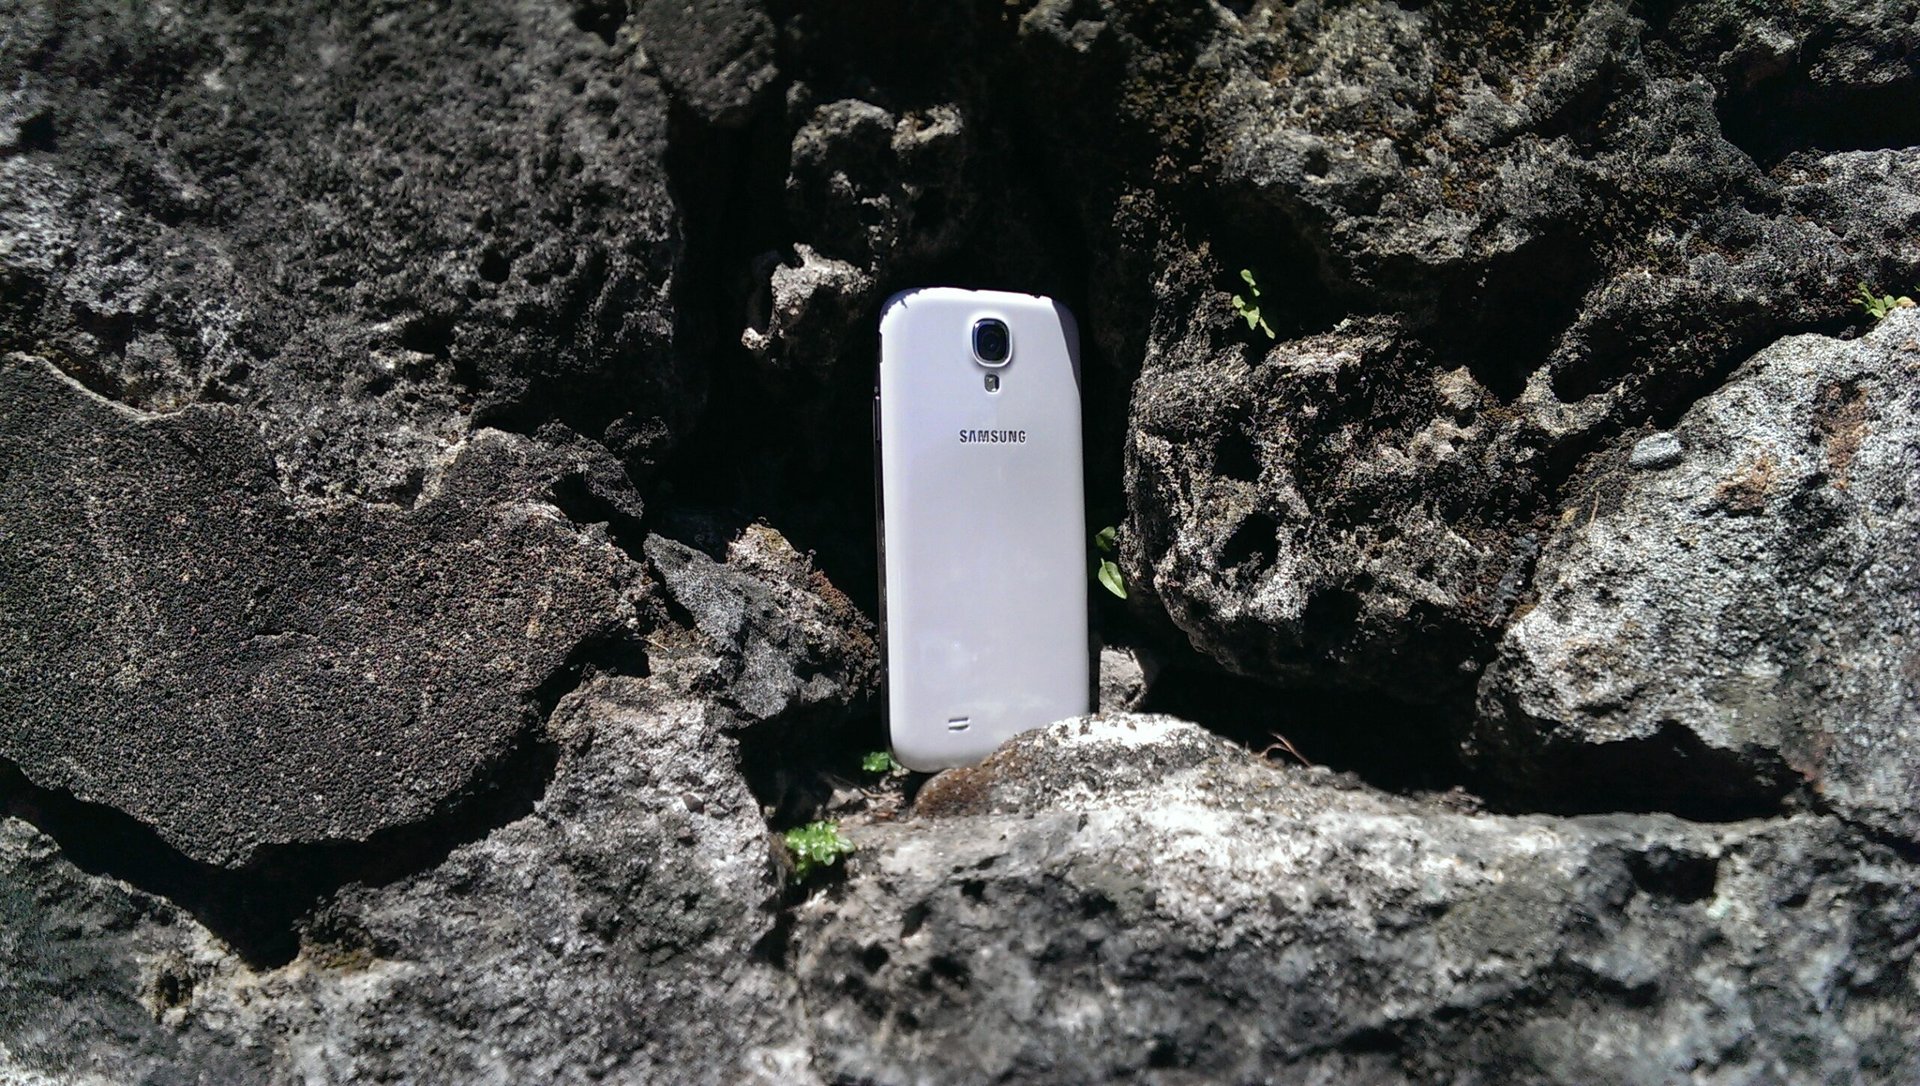 The HTCOne photographs the Galaxy S4.